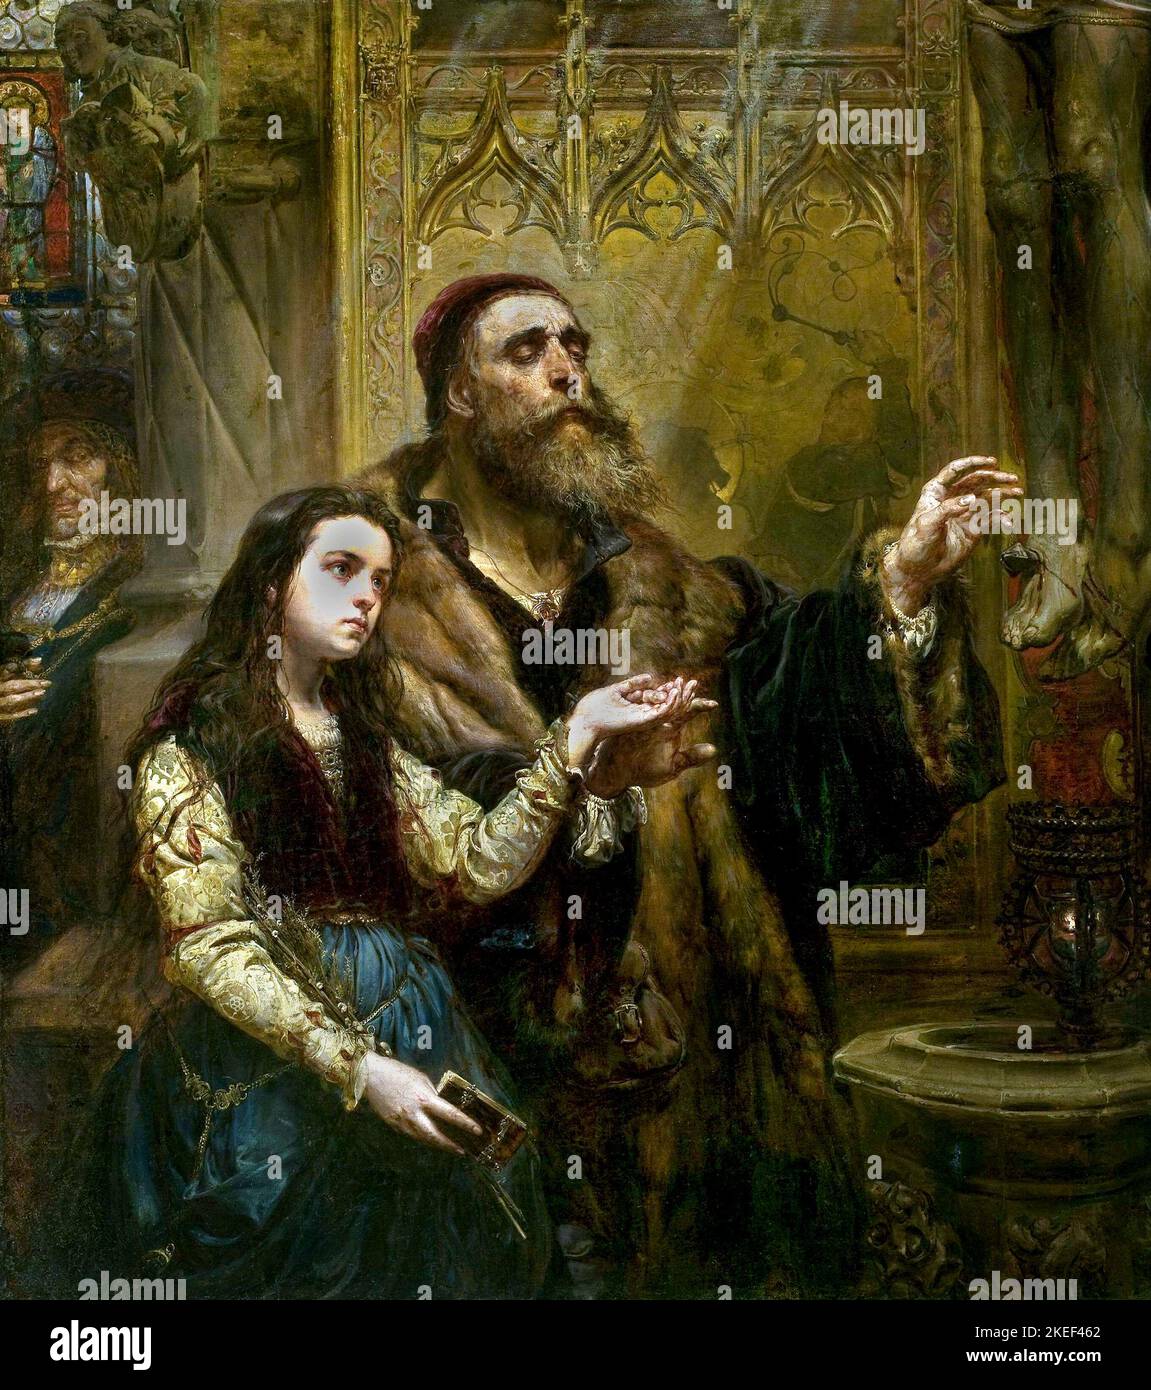 Jan Matejko, Blind Veit Stoss with Granddaughter, 1865, Oil on canvas, National Museum in Warsaw, Poland. Stock Photo